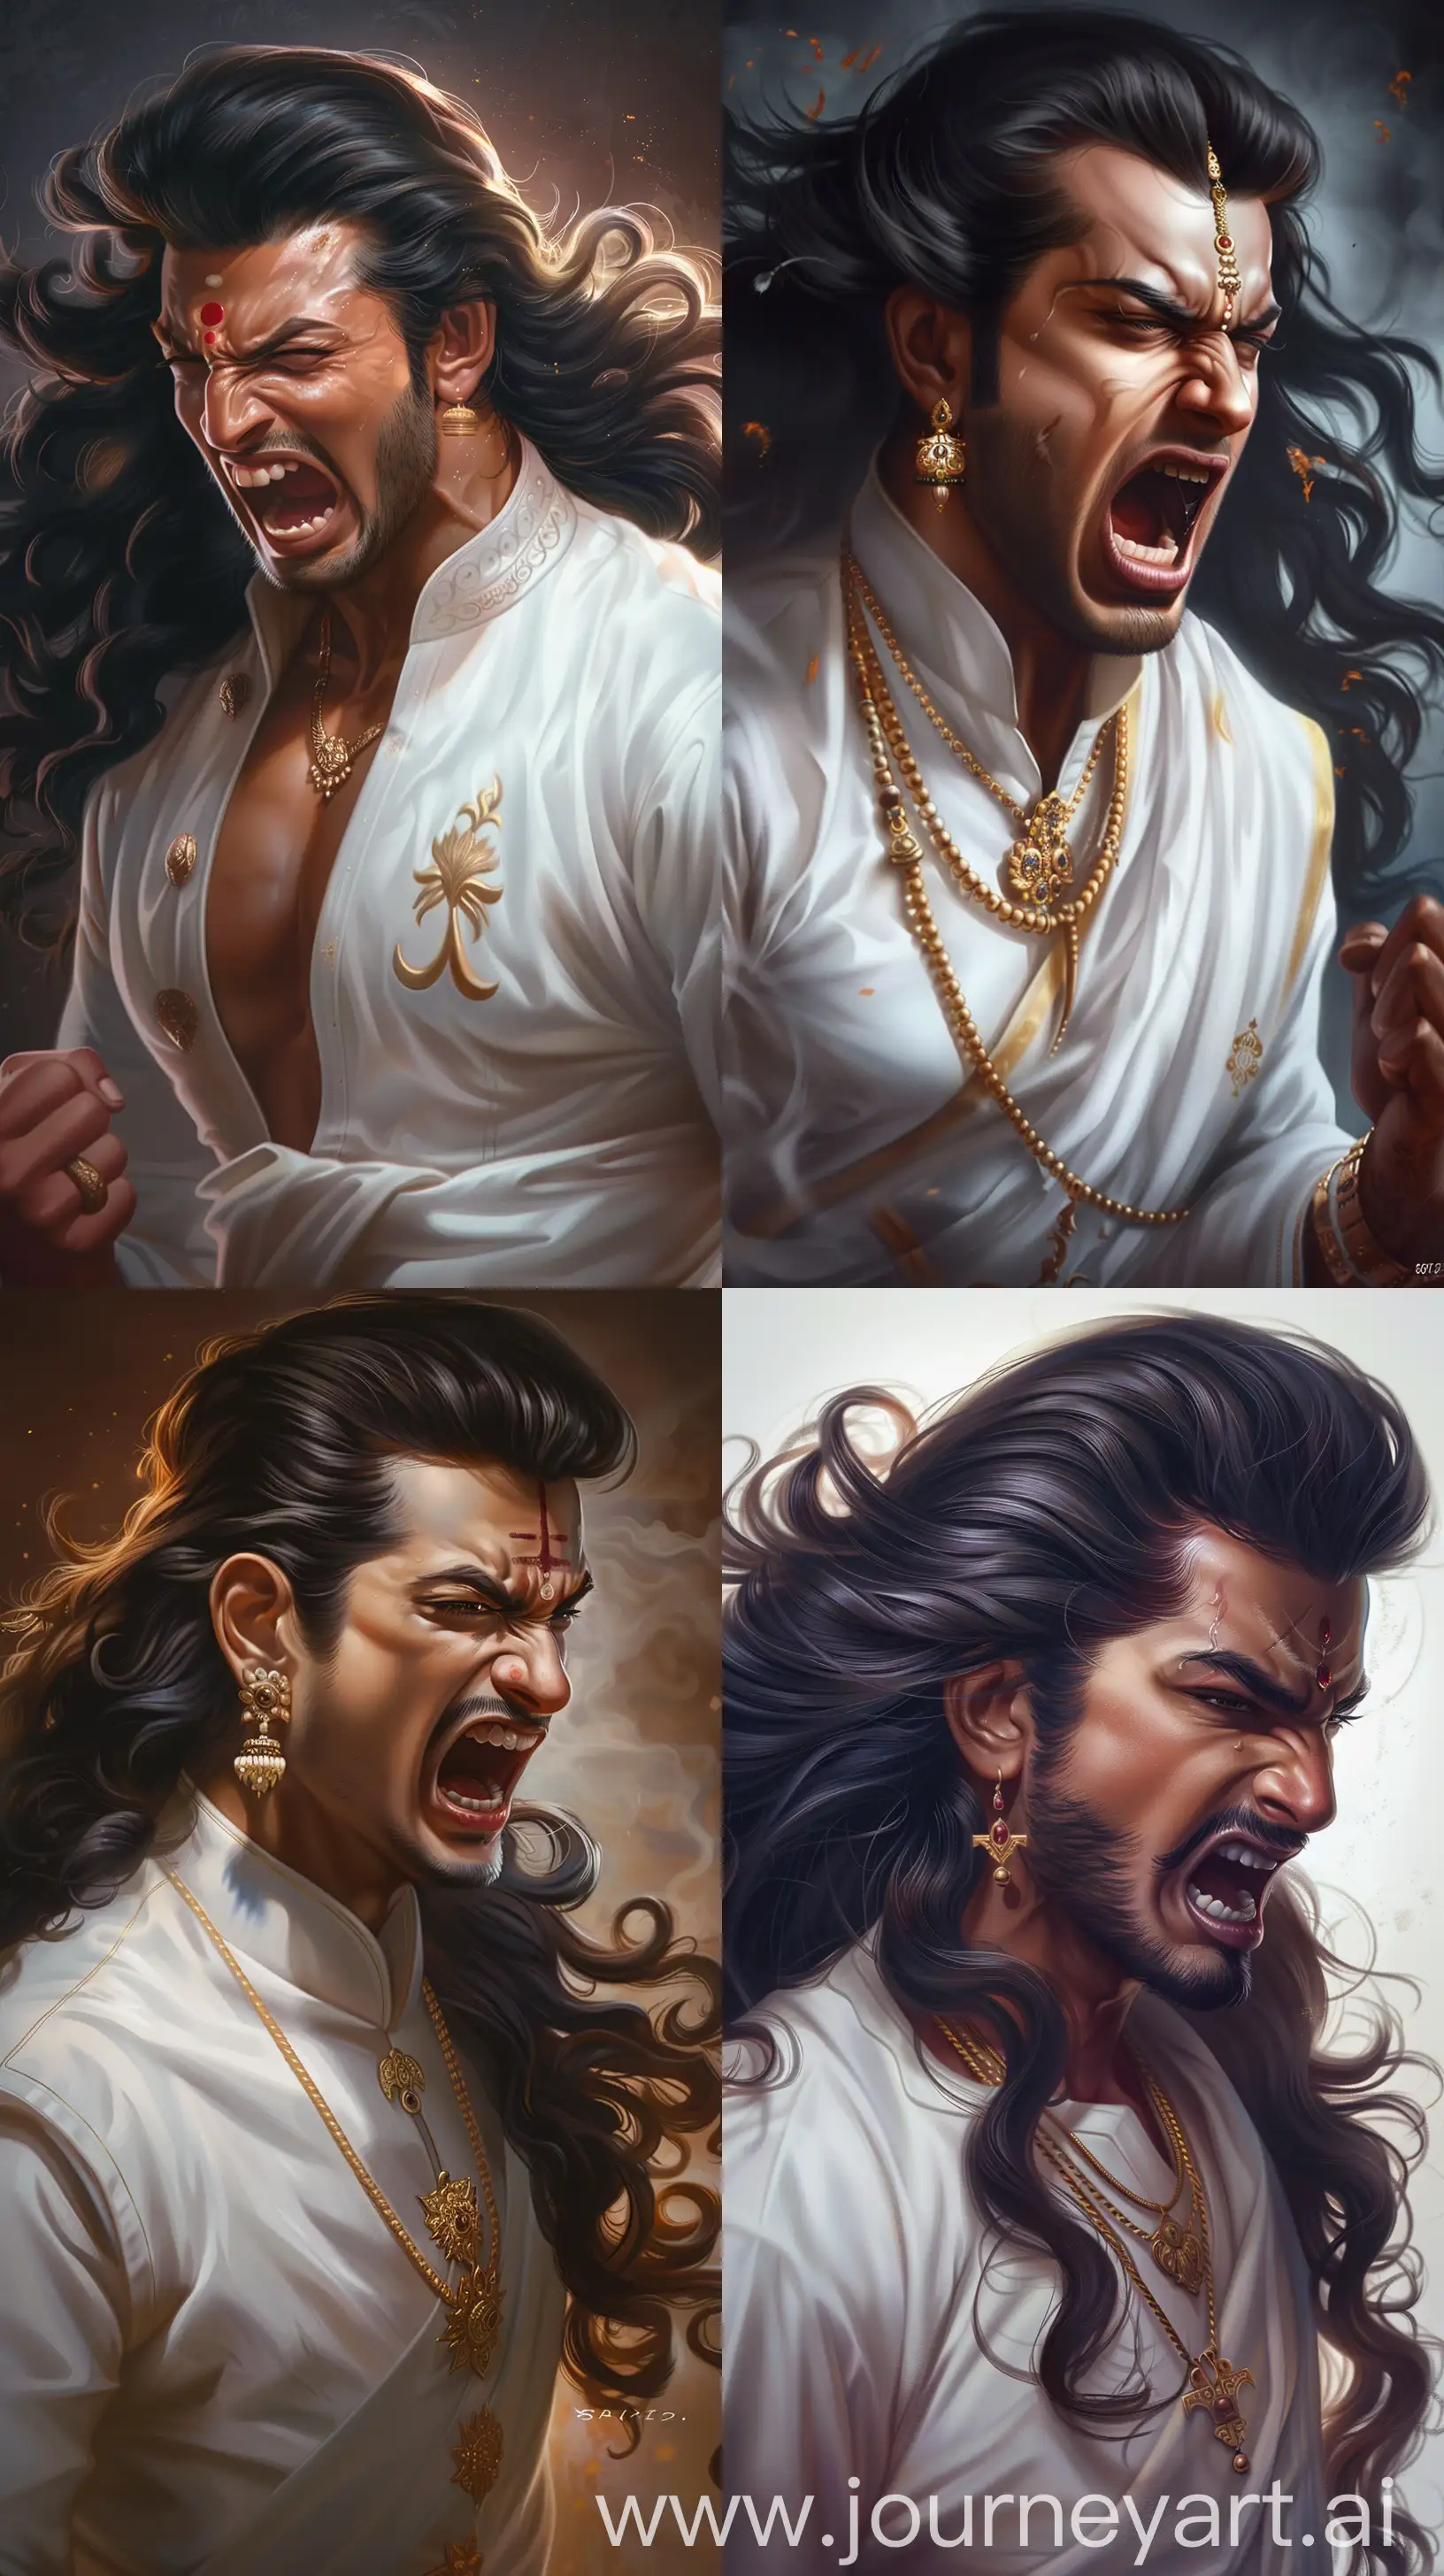 Furious-Young-Indian-Royal-in-Ornate-White-Attire-Yelling-HighQuality-8K-Image